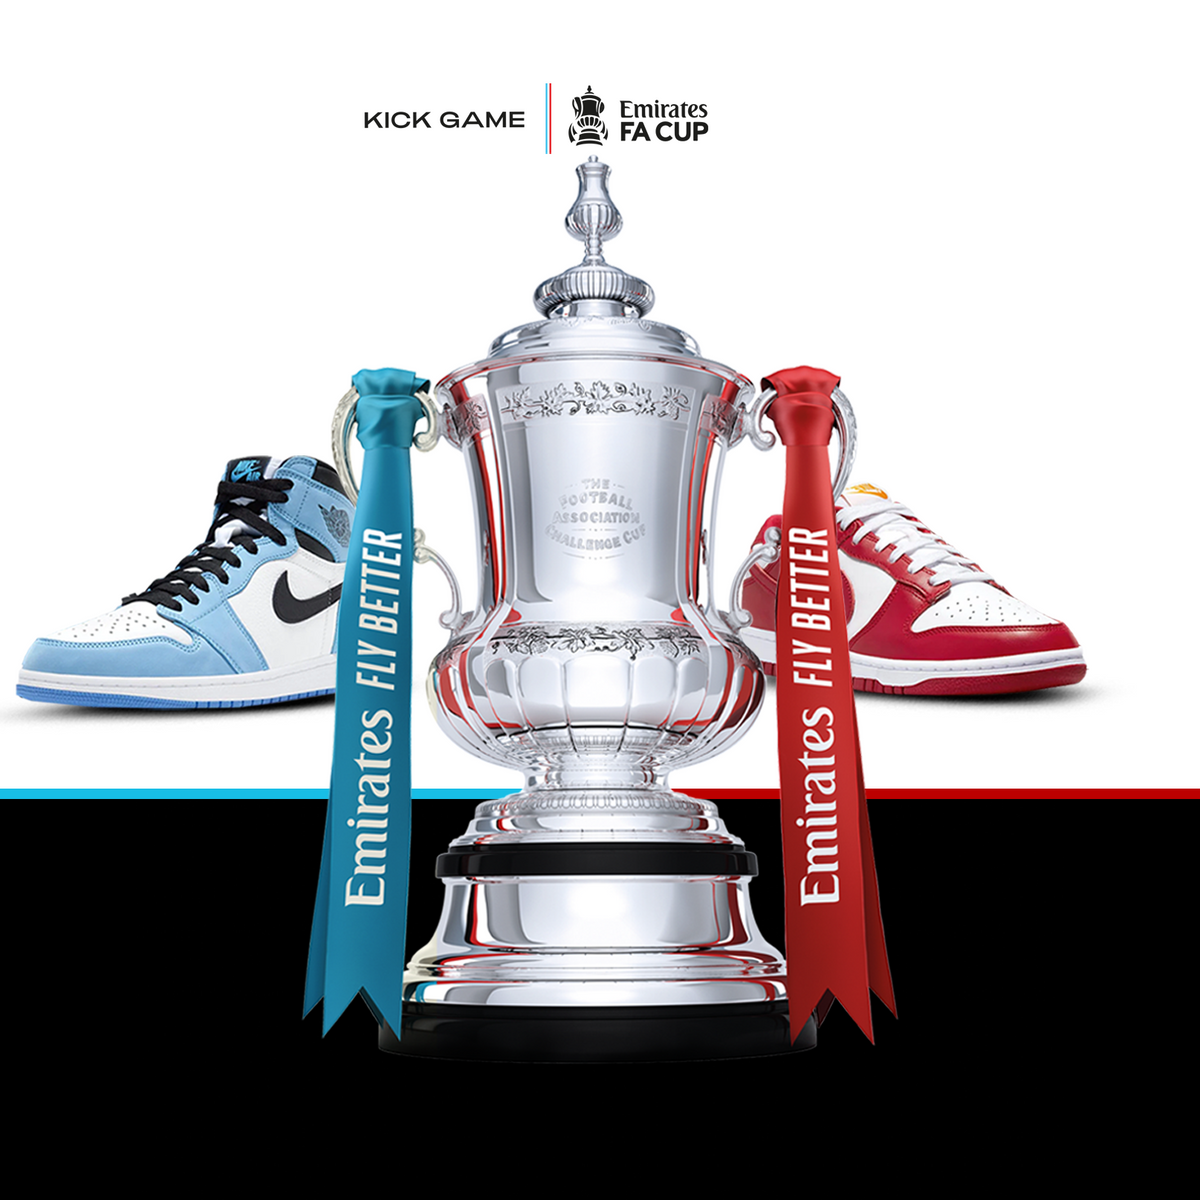 UrlfreezeShops Partnered With Emirates Fa Cup and Versus to Mark 2023’s Prestigious Game